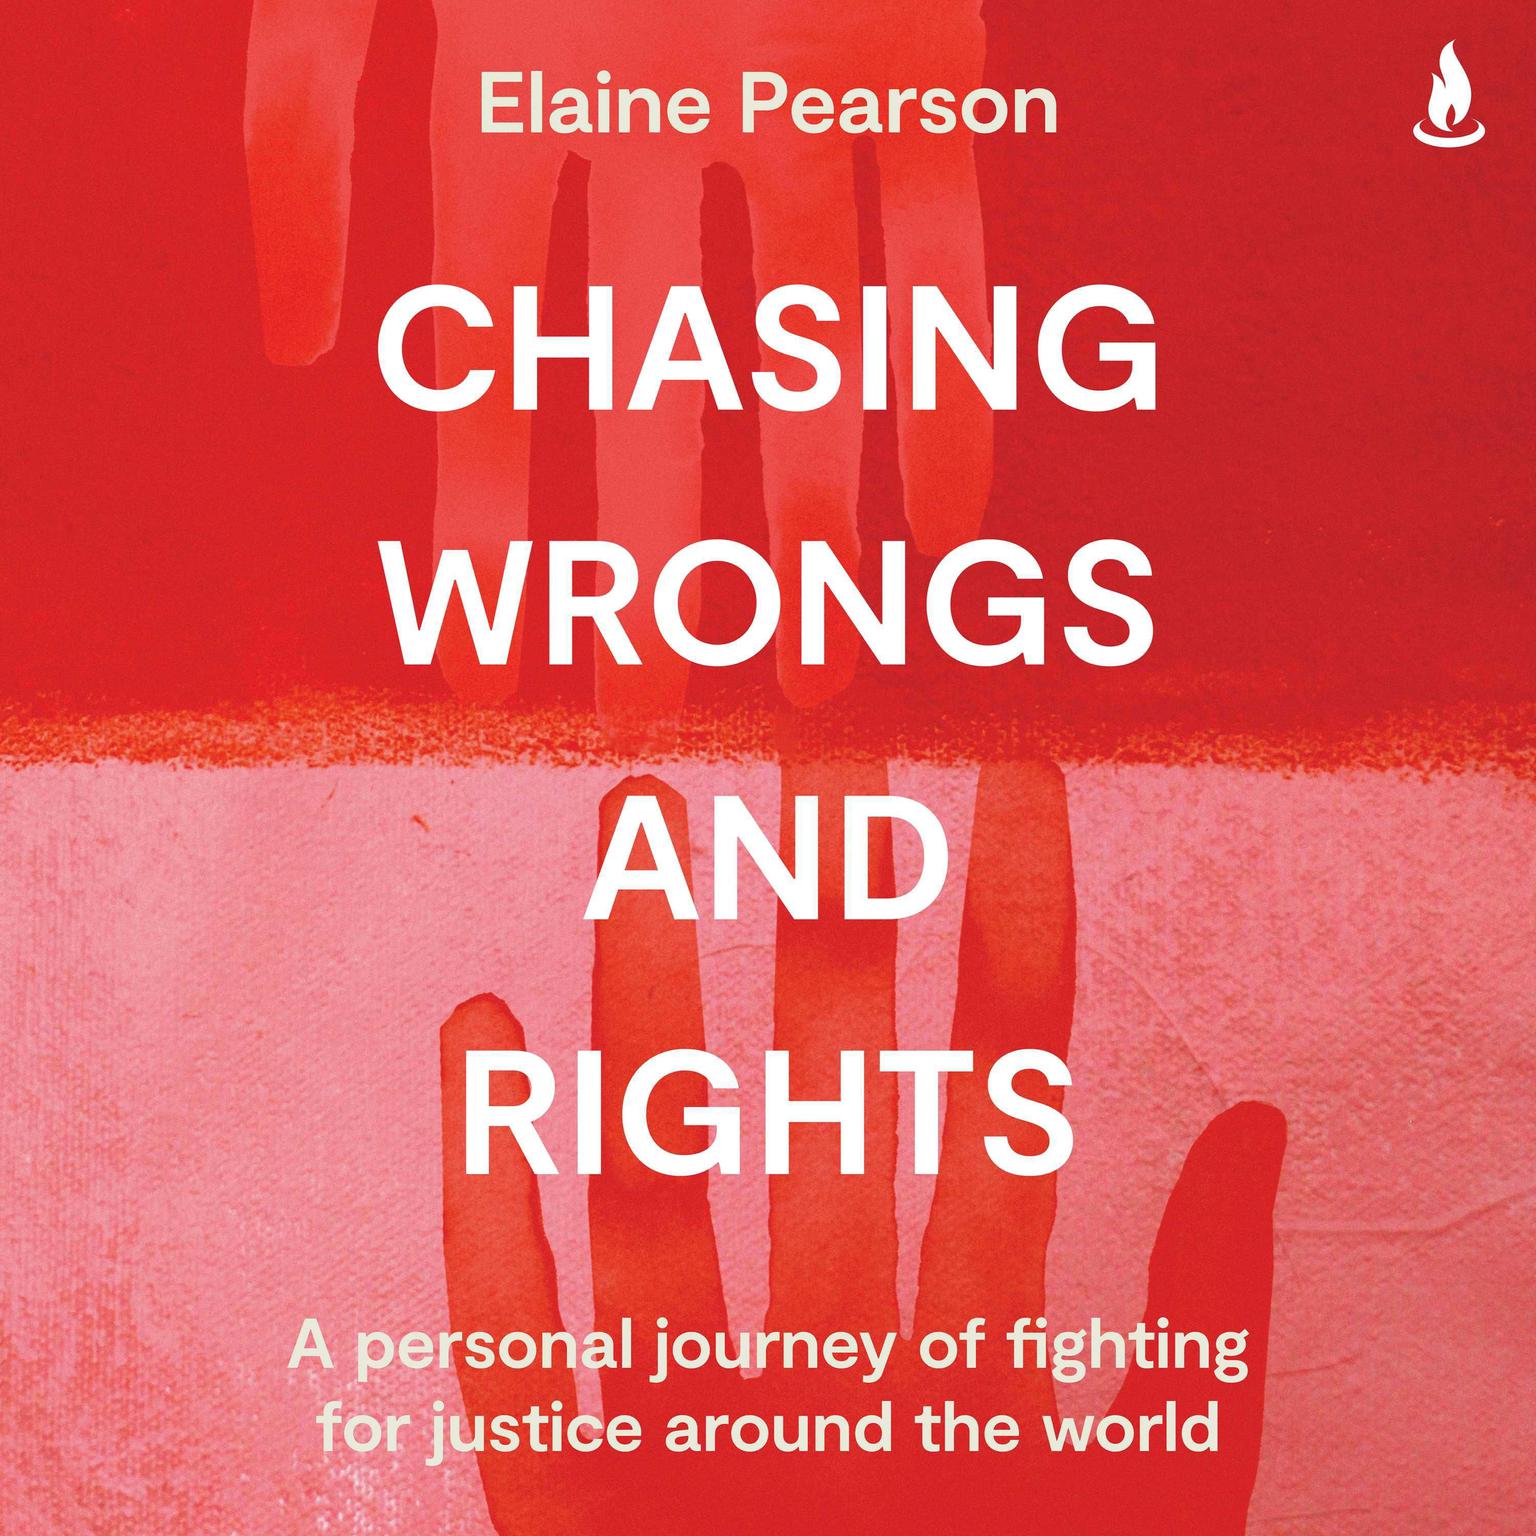 Chasing Wrongs and Rights: A personal journey of fighting for justice around the world Audiobook, by Elaine Pearson